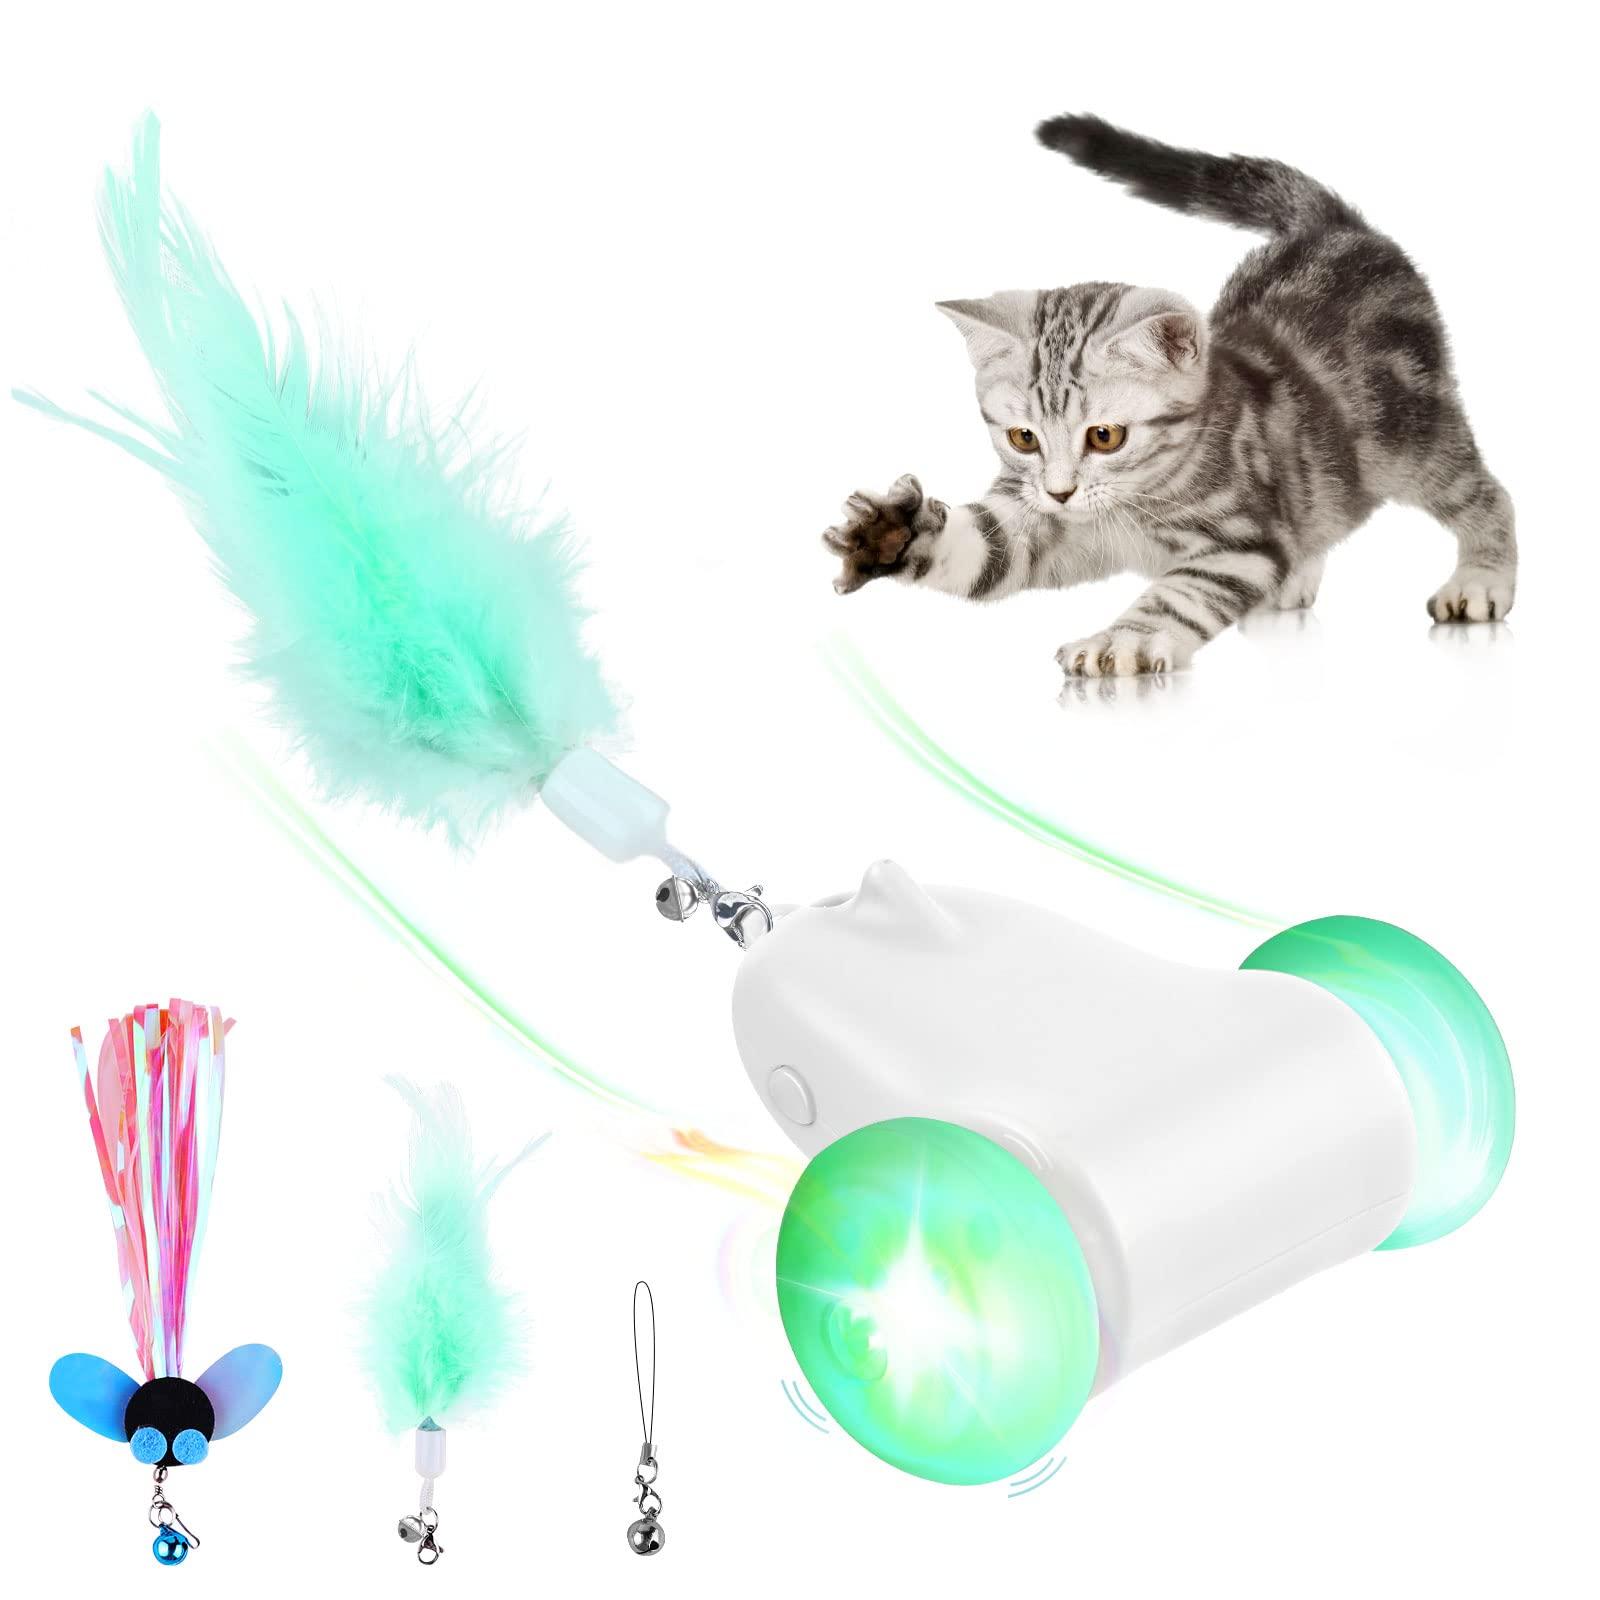 FWLWTWSS Interactive Cat Toy, Automatic Cat Toy Electric Cat Toy Adjustable Speed, Cat Toys with Intelligent Obstacle Sensor for Cat